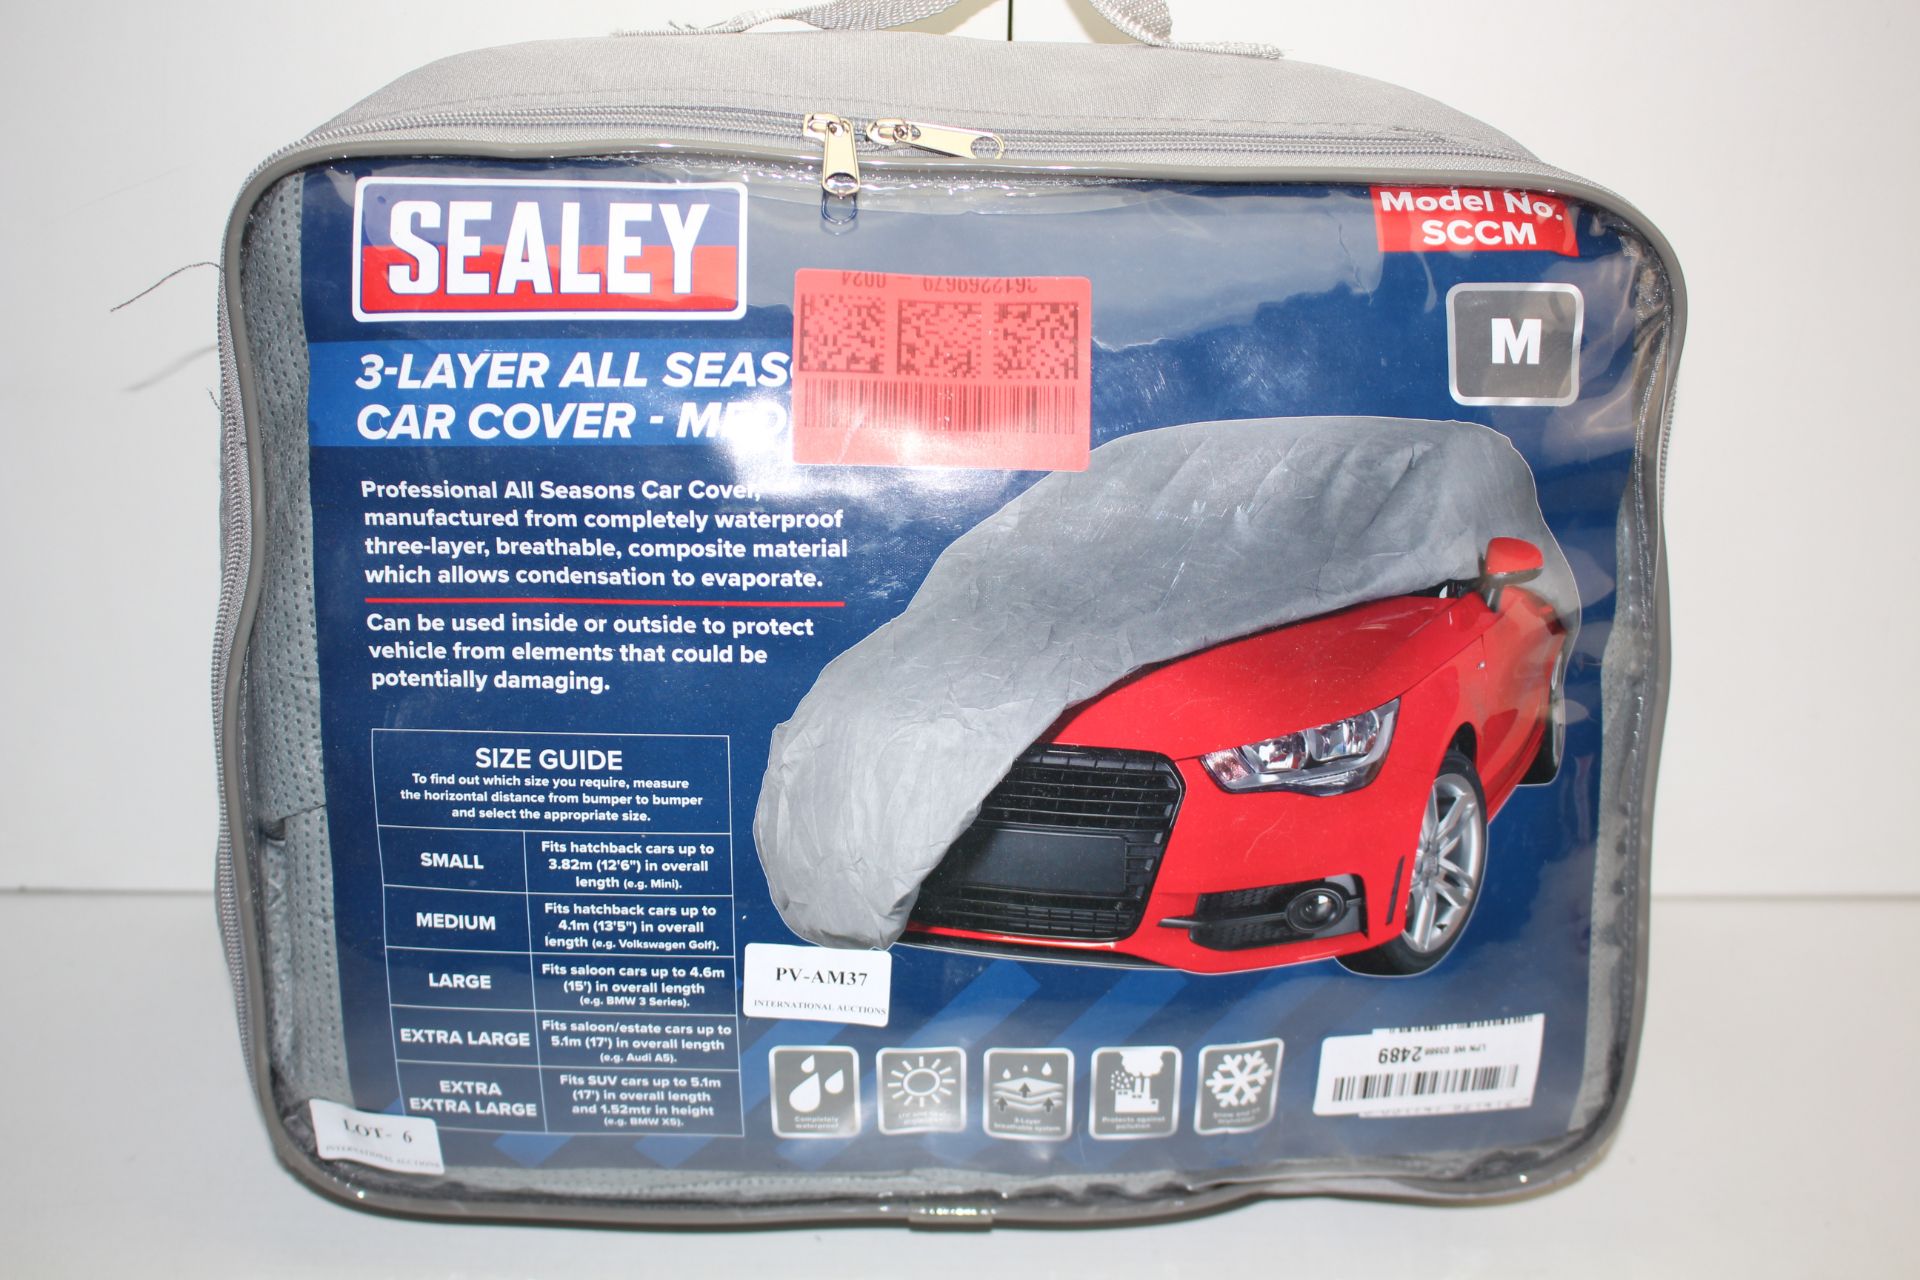 BAGGED SEALEY 3-LAYER ALL SEASONS CAR COVER MEDIUM MODEL NO. SCCM RRP £54.50Condition